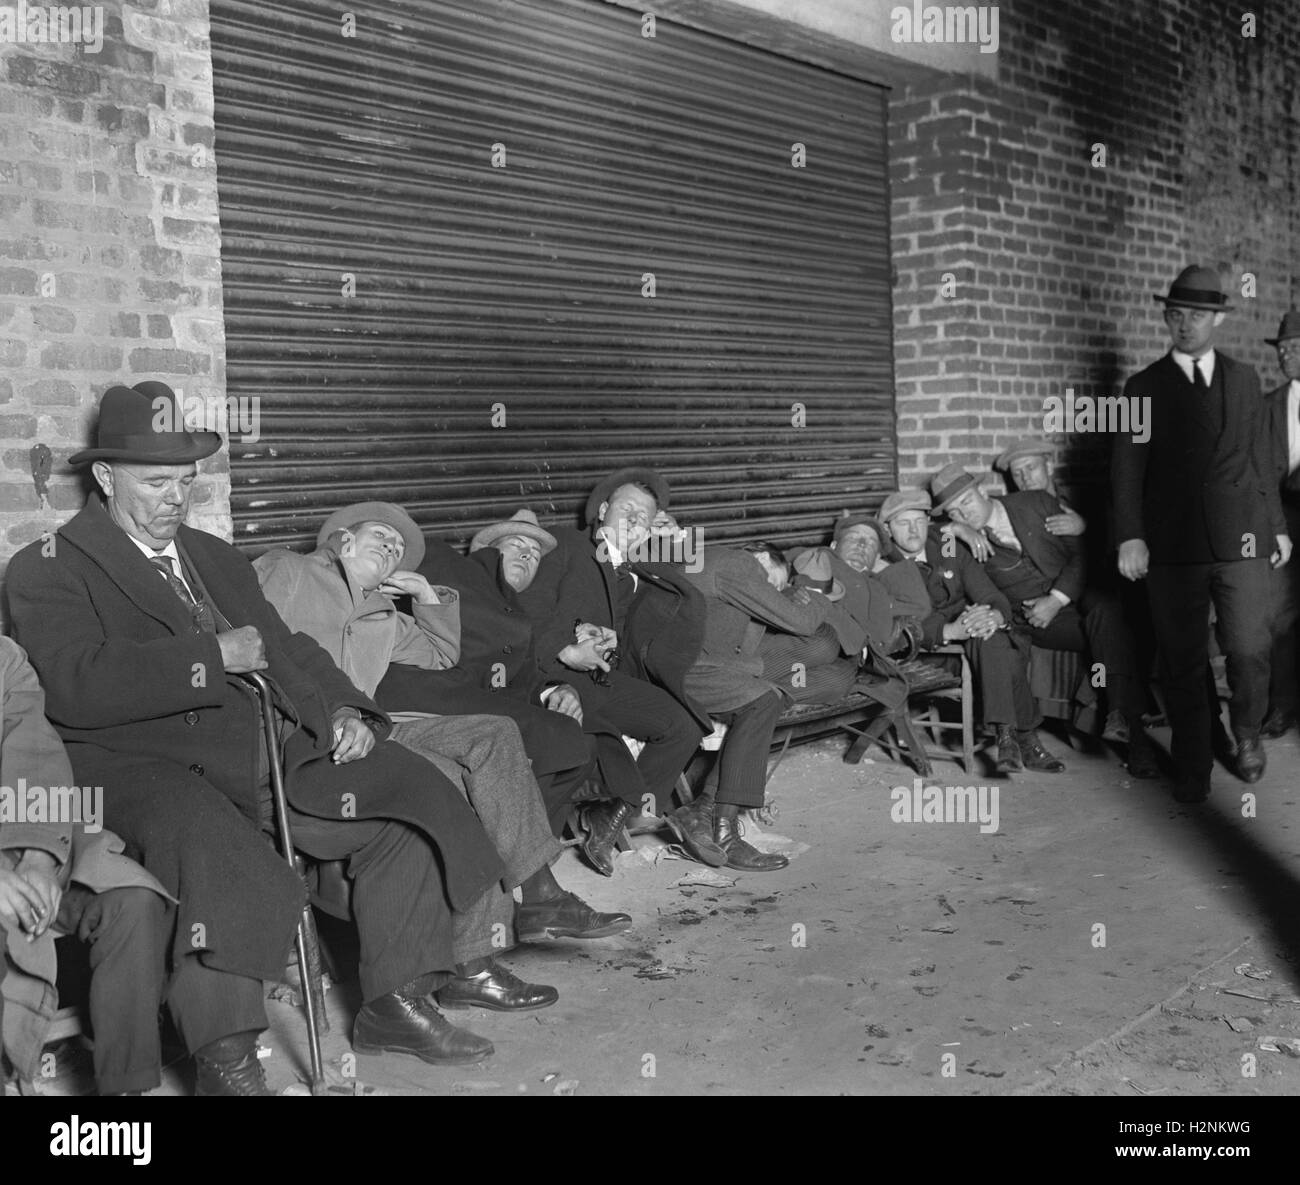 Line of Sleeping Men Waiting for the Sale of World Series Tickets, Griffith Stadium, Washington DC, USA, National Photo Company, October 3, 1924 Stock Photo